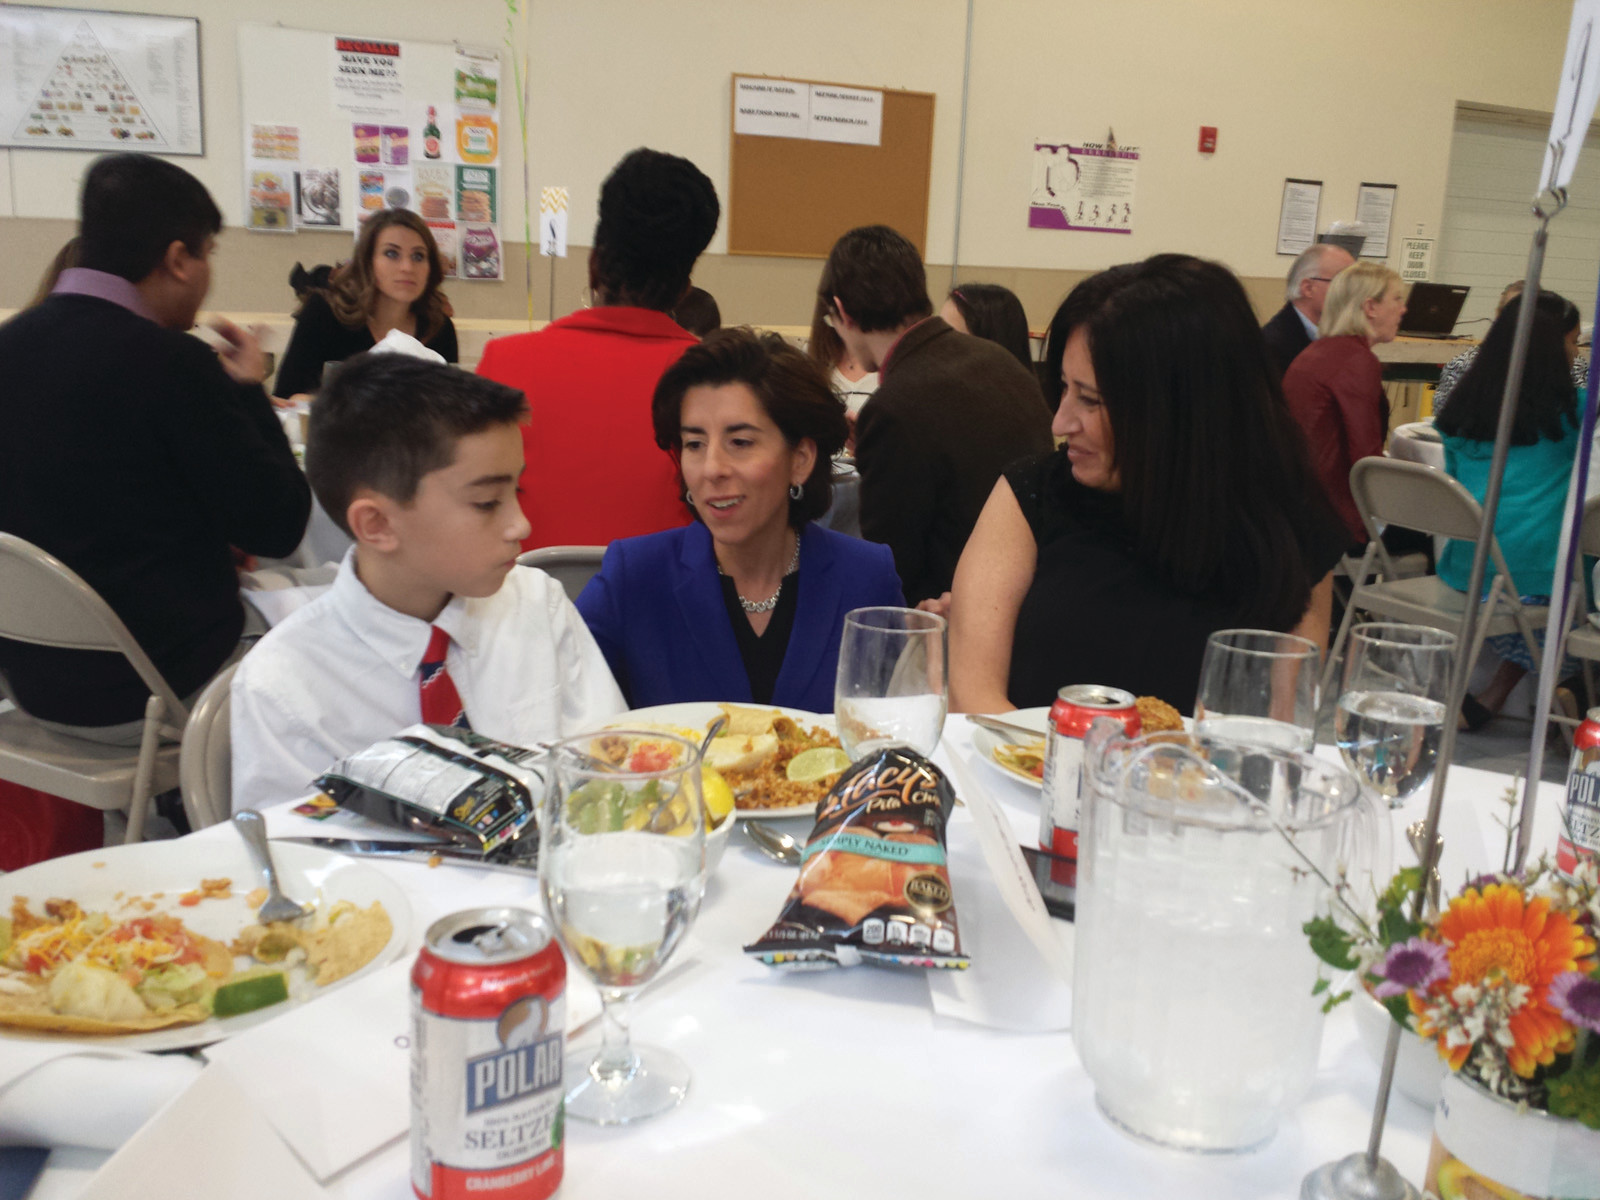 SHARING THE RECIPE: Gov. Gina Raimondo stopped to congratulate each of the finalists and their families and to talk to them about their winning recipes. Here, Cranston’s Nicholas Soccio, a fifth-grader from Immaculate Conception Catholic Regional School, describes his oven baked carrot fries as his mother, Jessica, looks on.